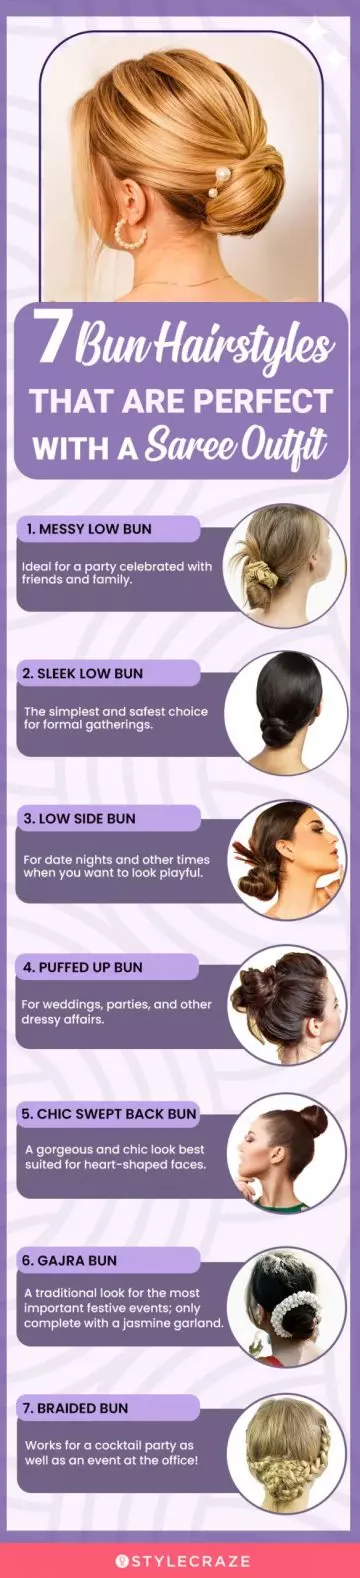 7 Bun Hairstyles That Are Perfect With A Saree Outfit (infographic)